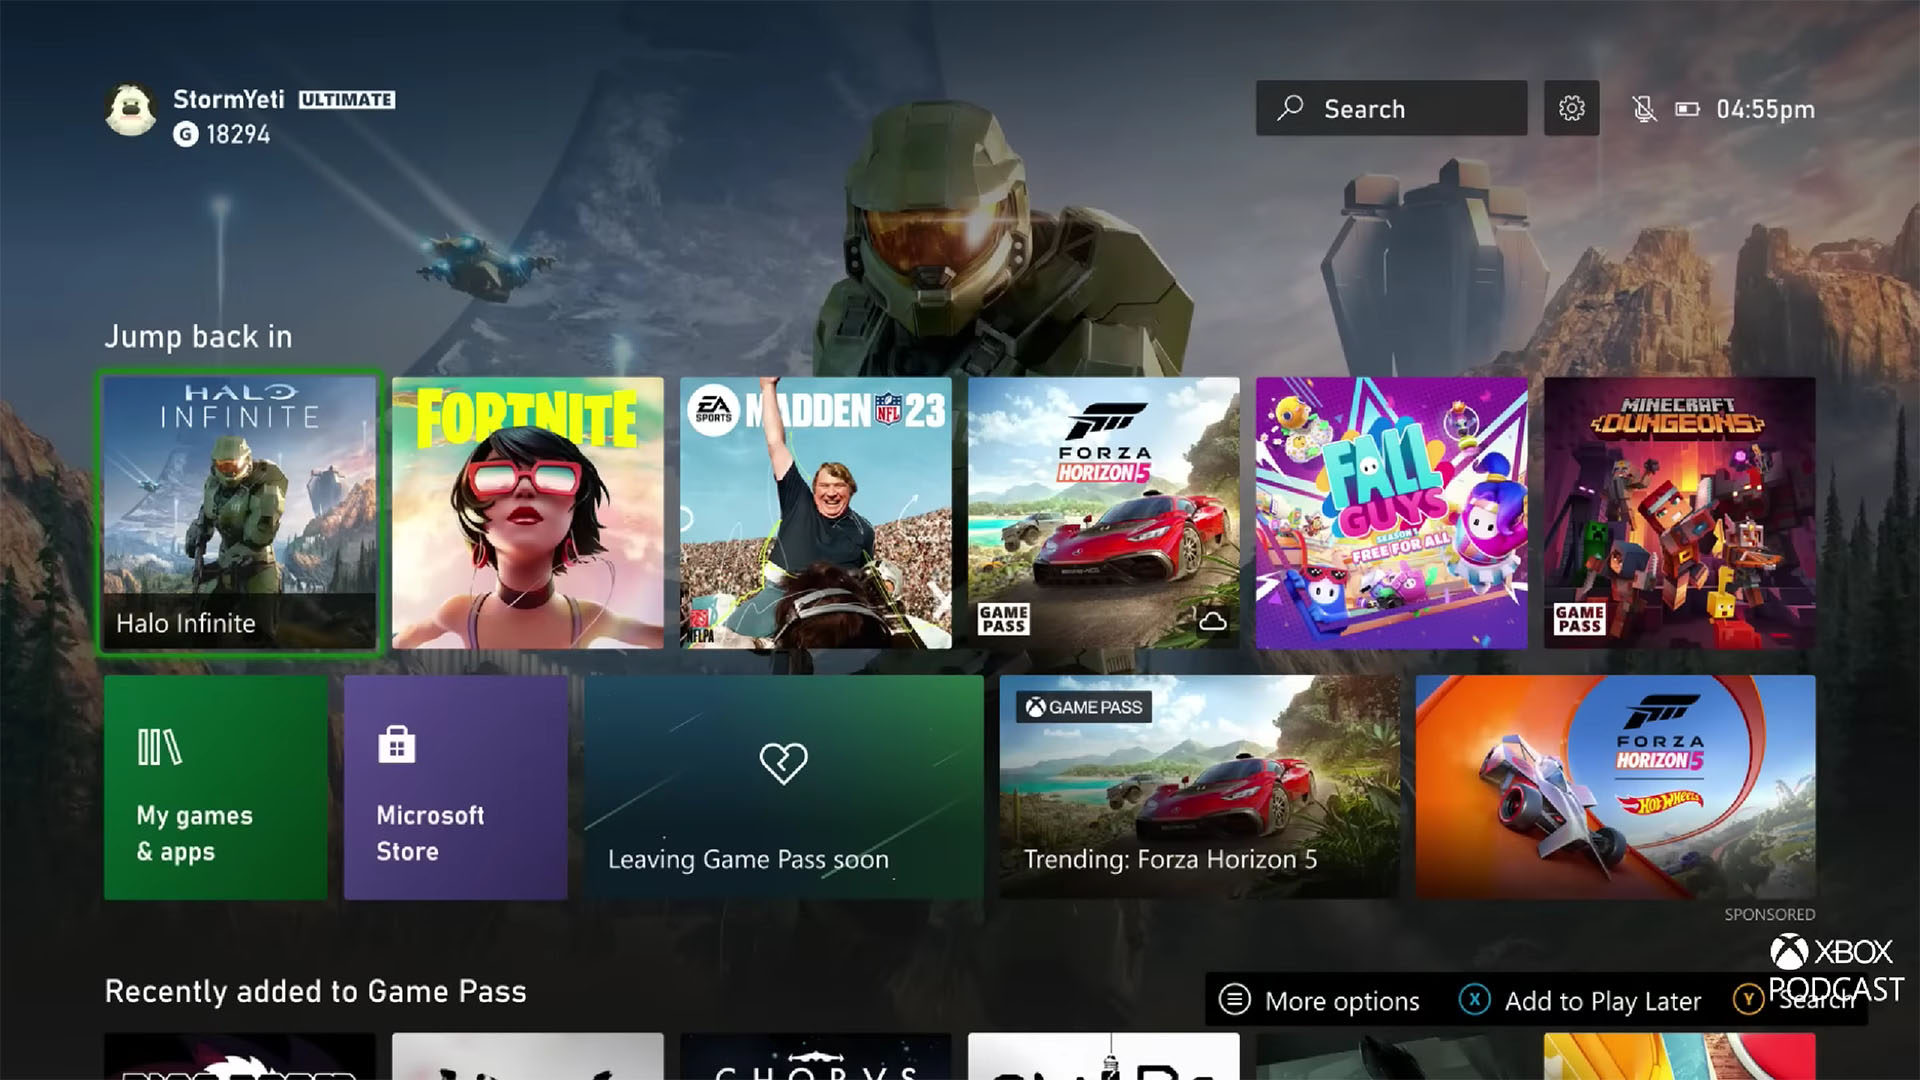 Microsoft said “you can’t have the blades back” in response to new Xbox dashboard